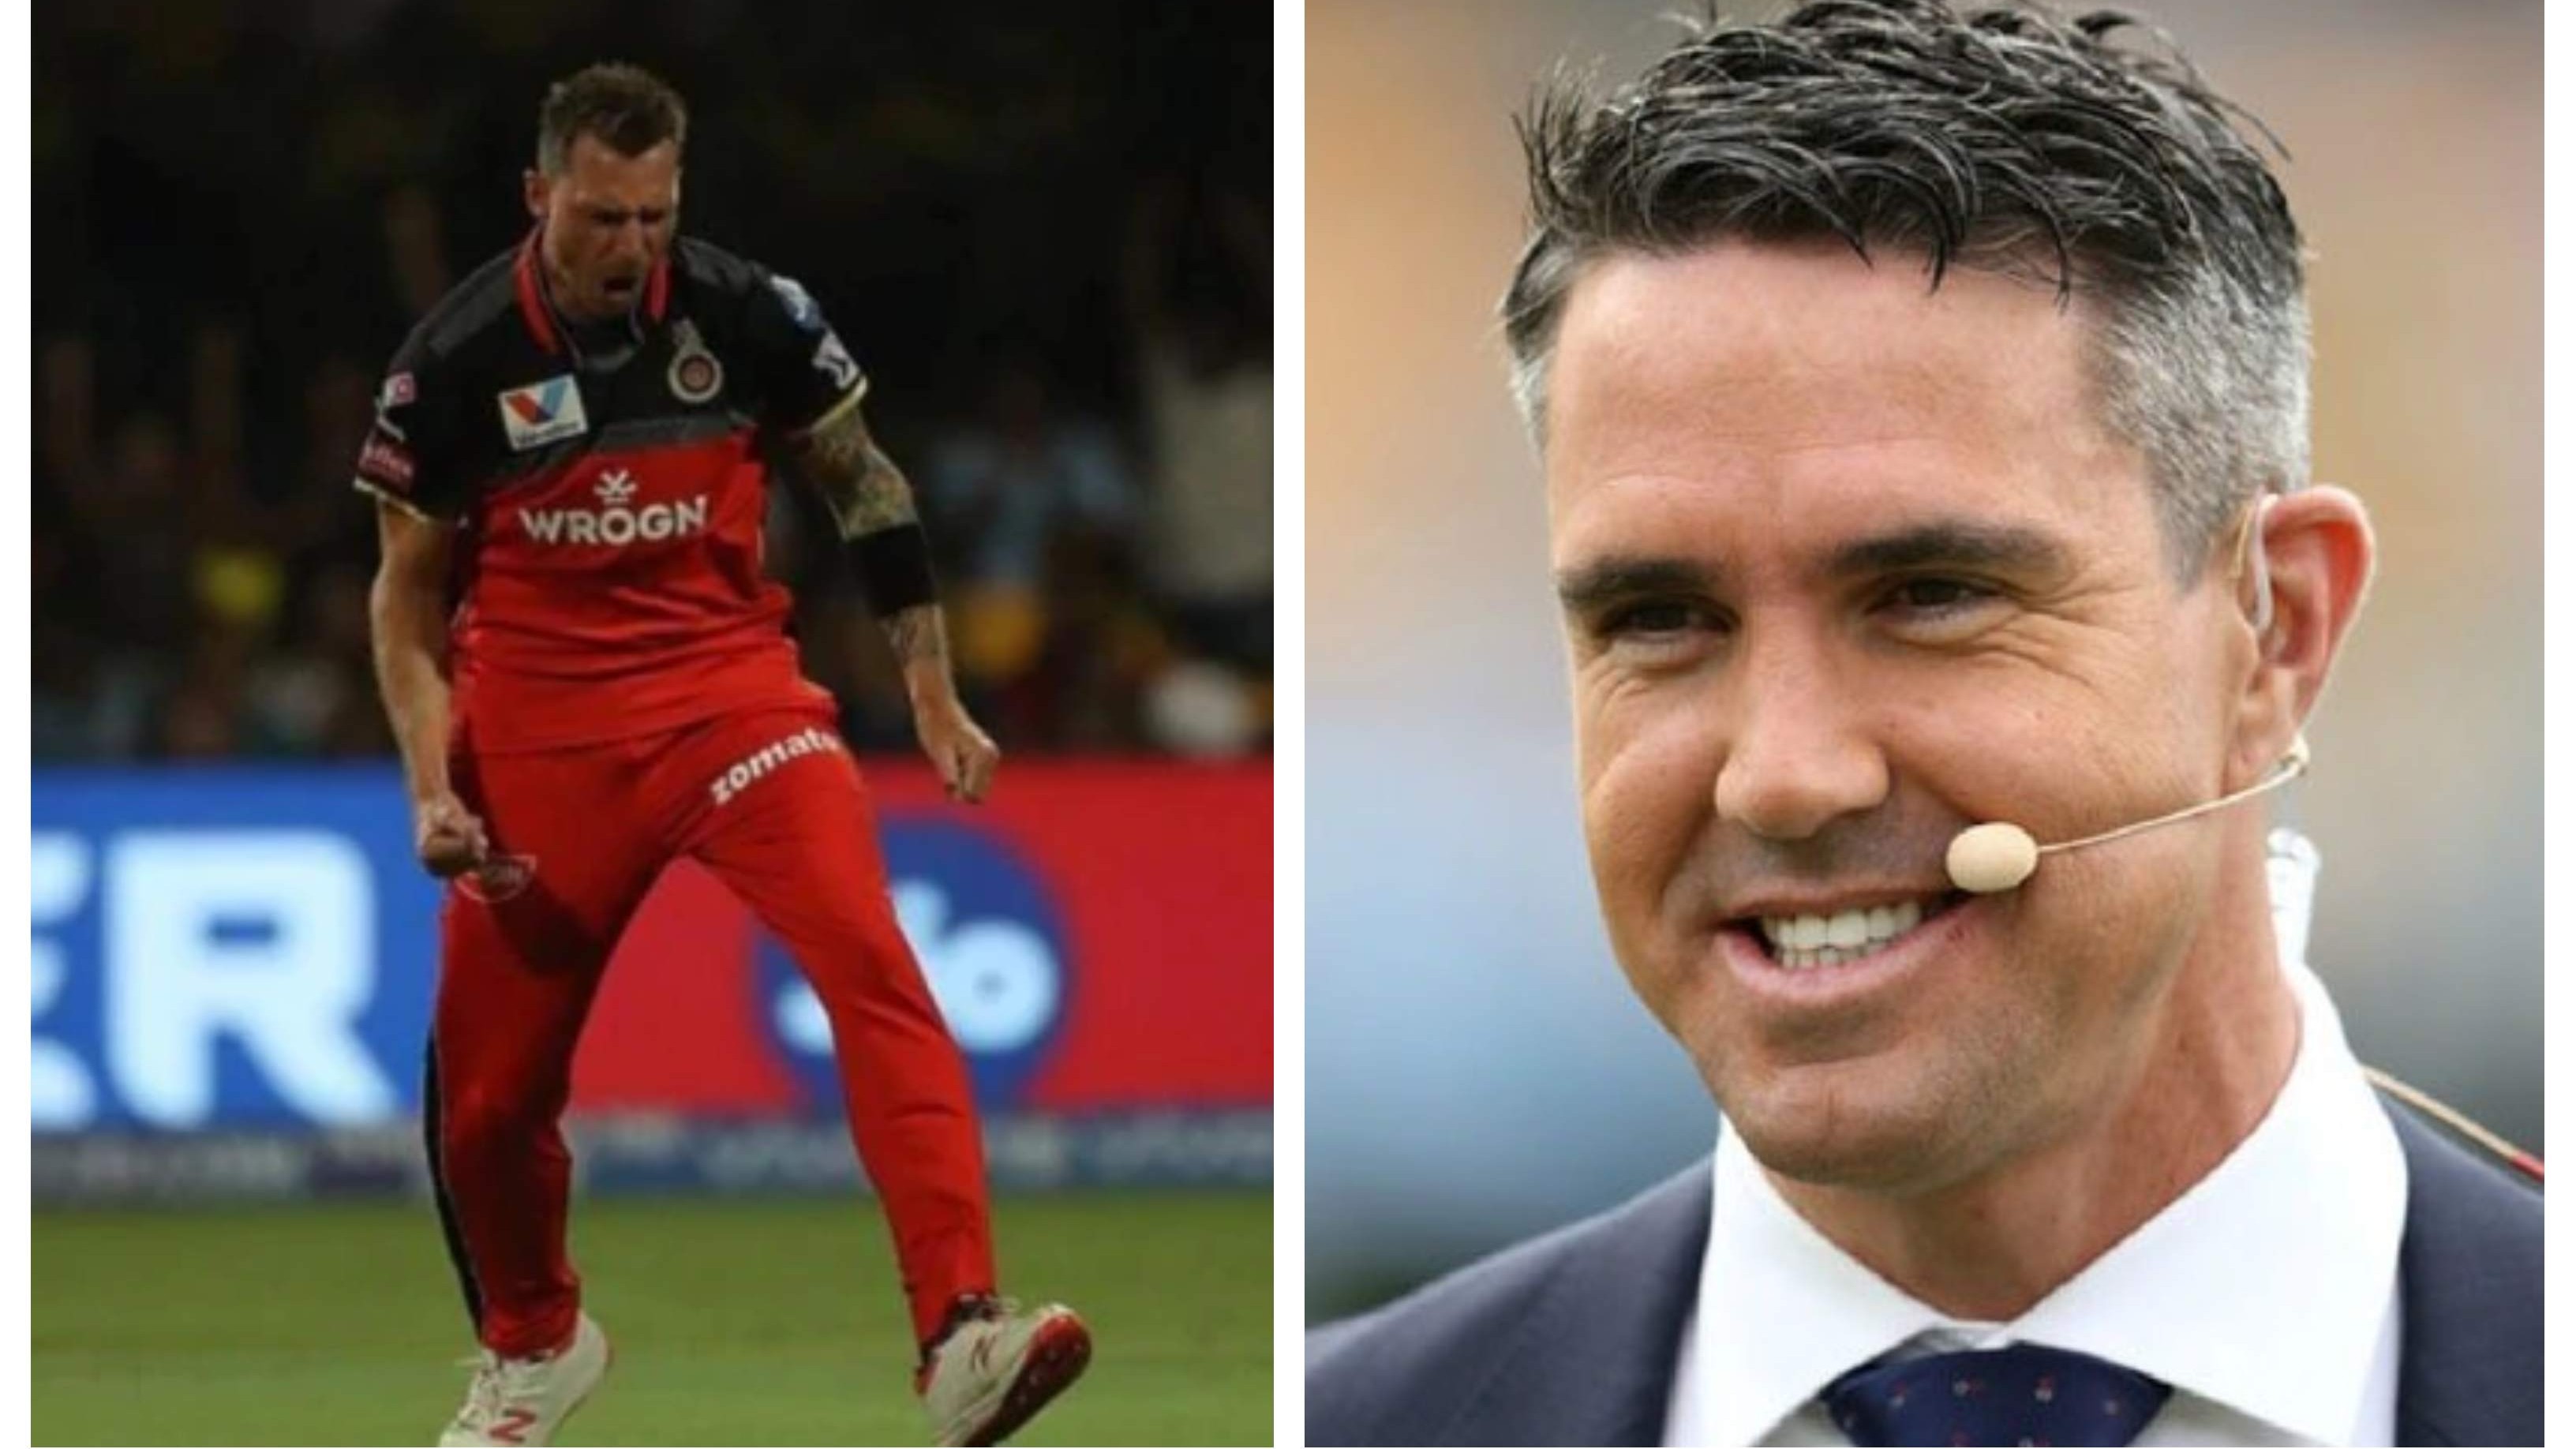 “Had to go to IPL directly from PSL, but everything is like just gone” – Steyn tells Pietersen